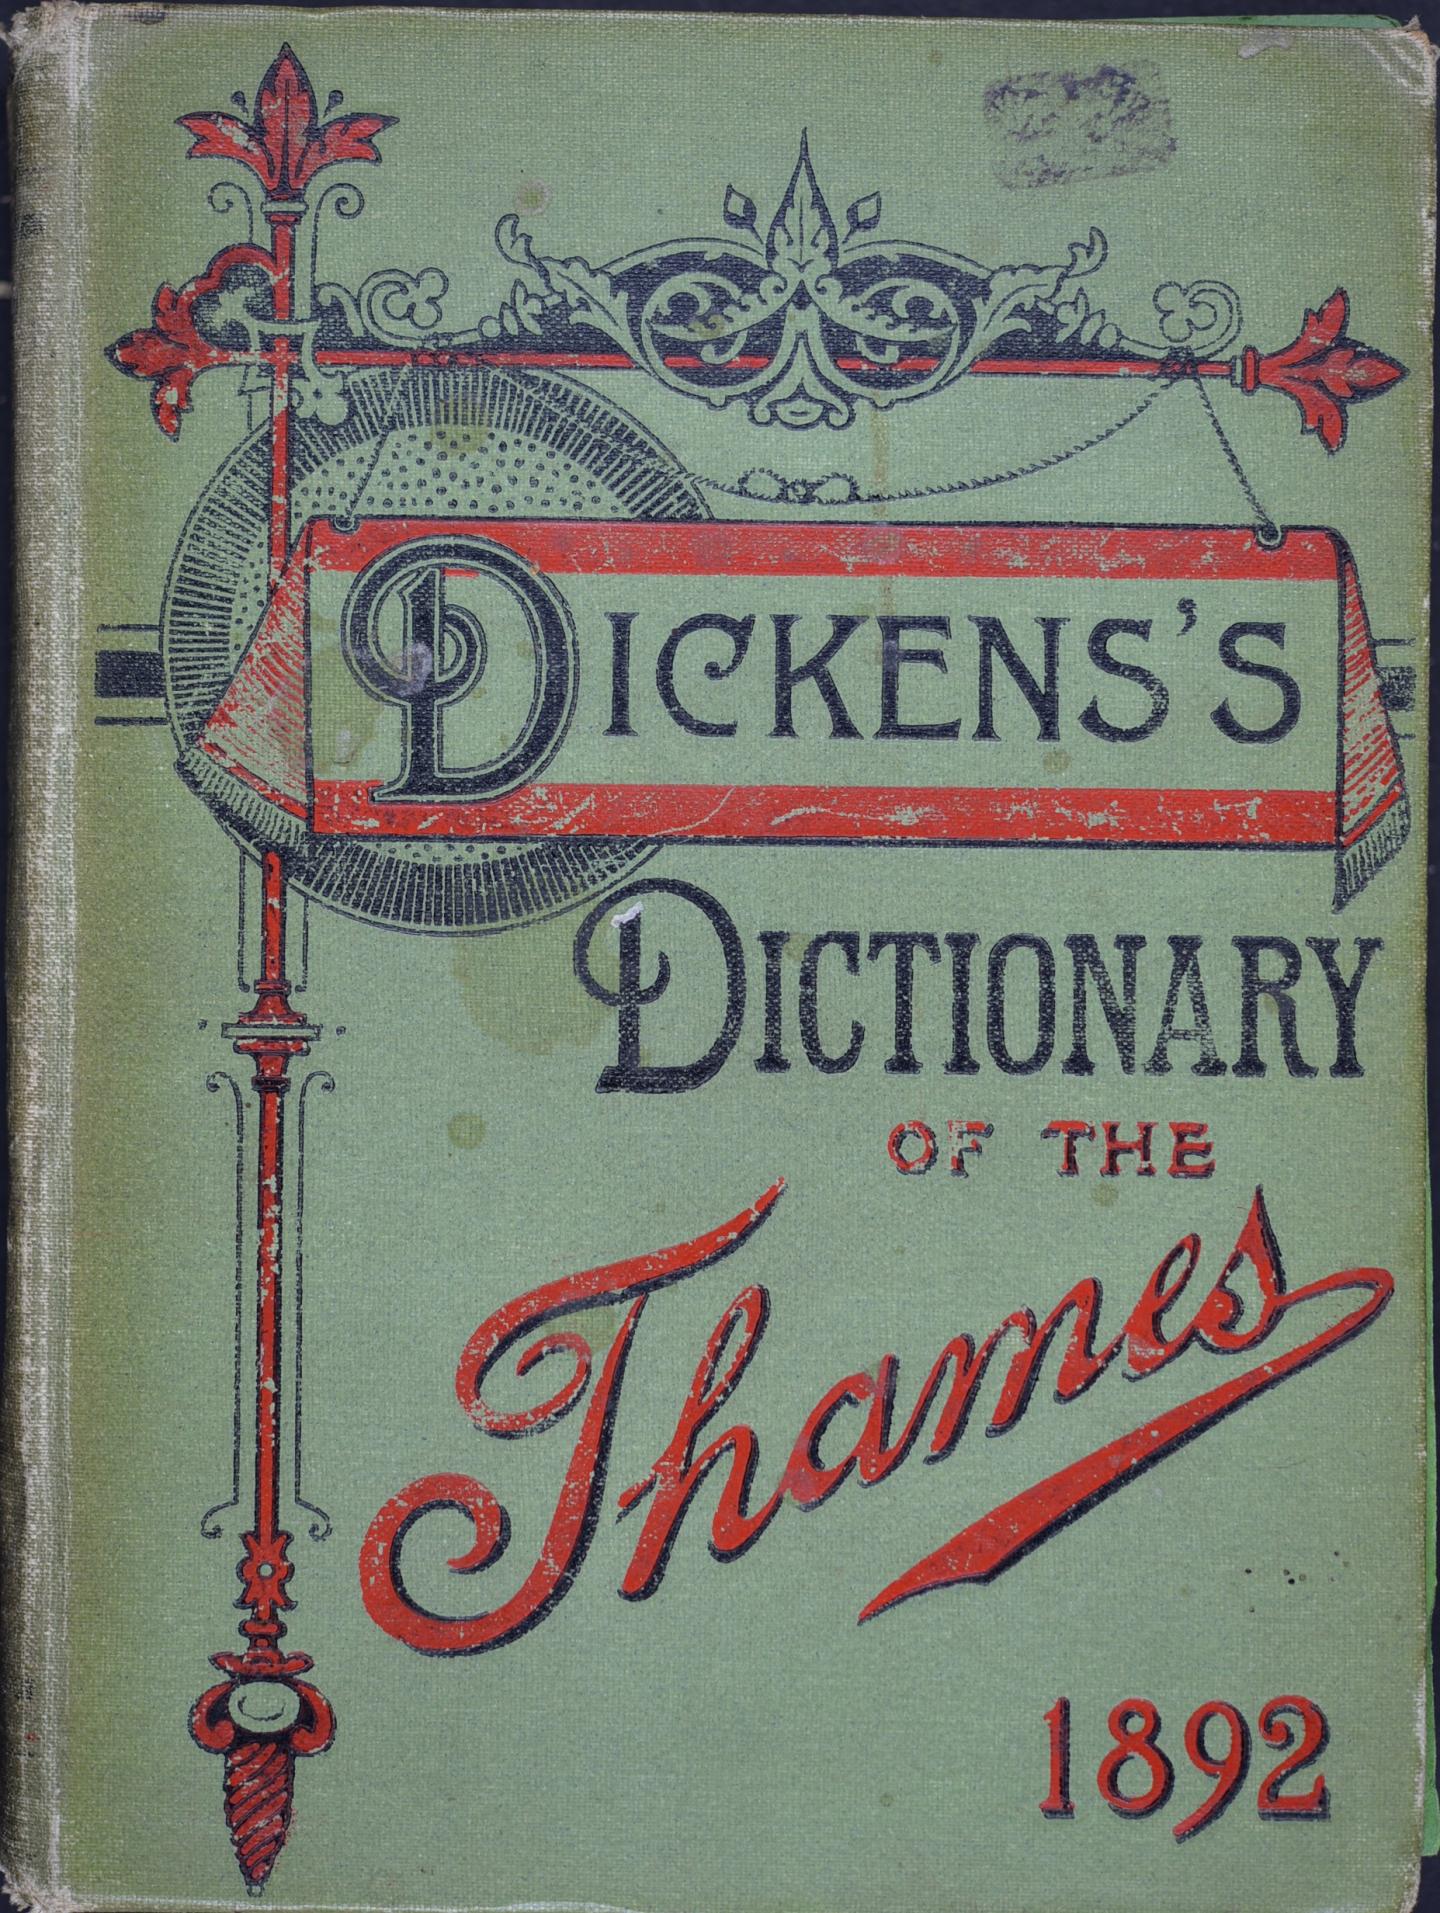 Dickens’s Dictionary of the Thames 1892 front cover.